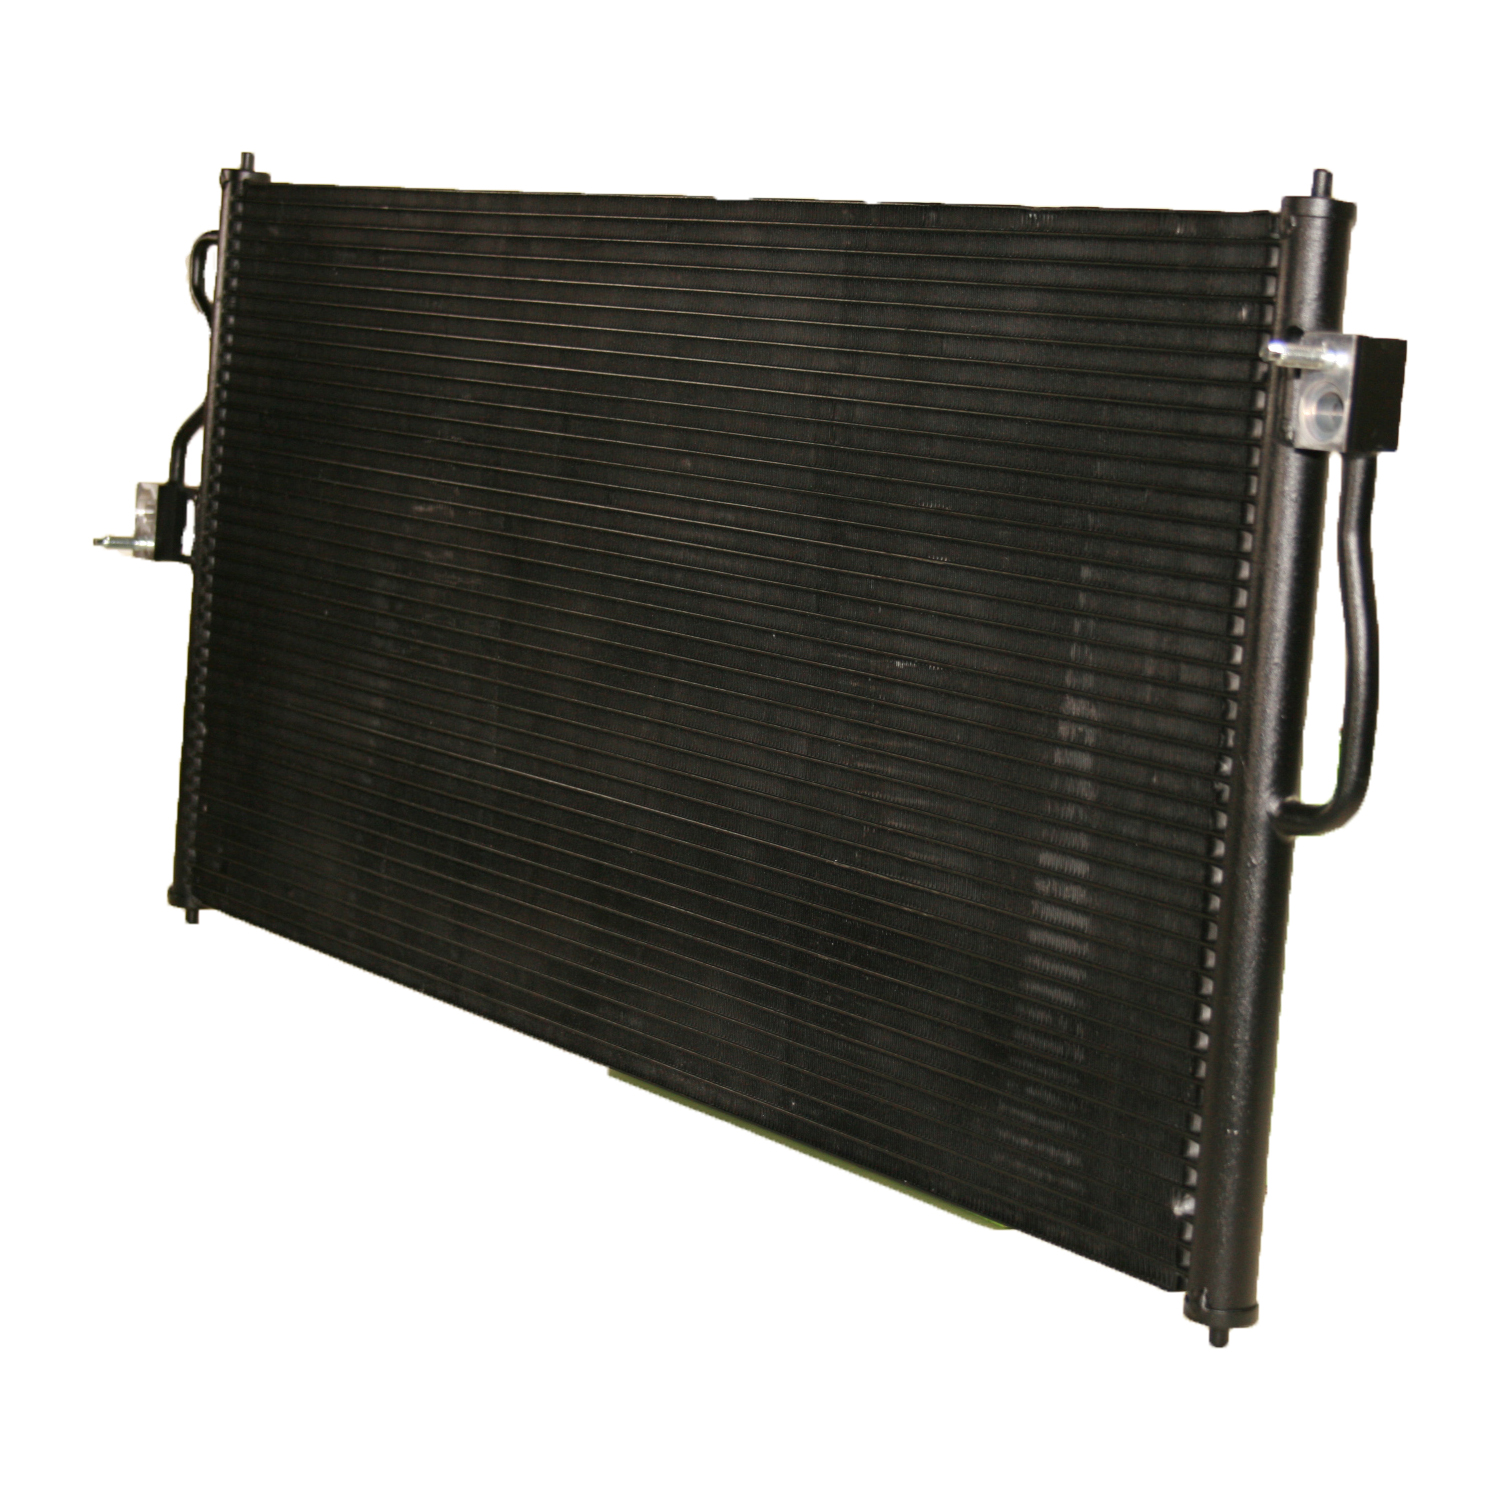 TCW Condenser 44-3023 New Product Image field_60b6a13a6e67c